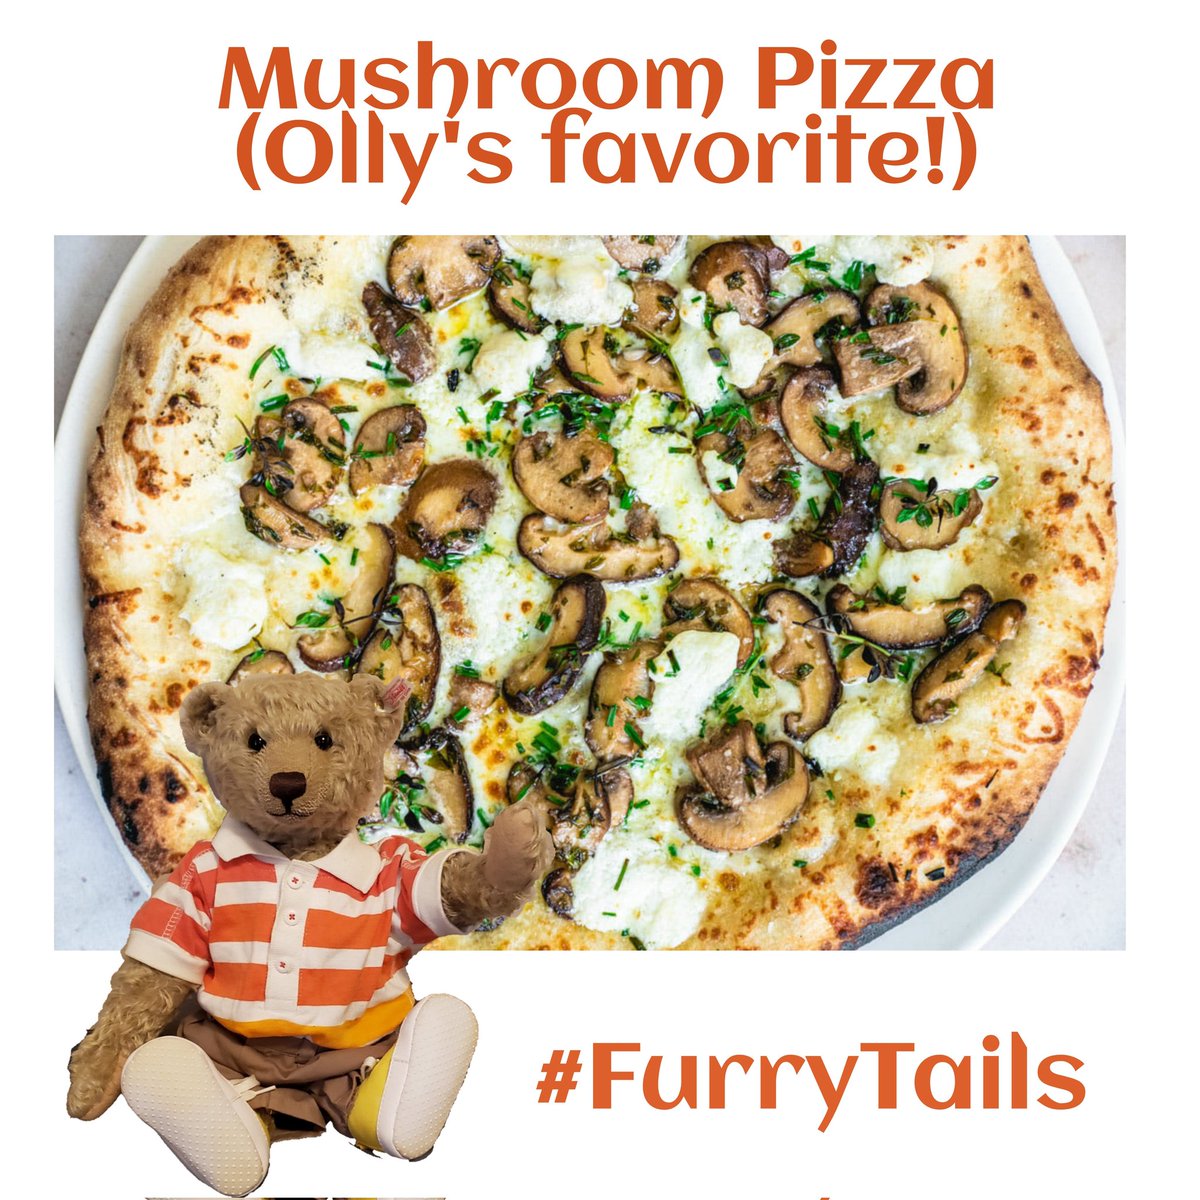 *sets aside mushroom pizzas for @TourGuideTed and @macwhittle* #FurryTails